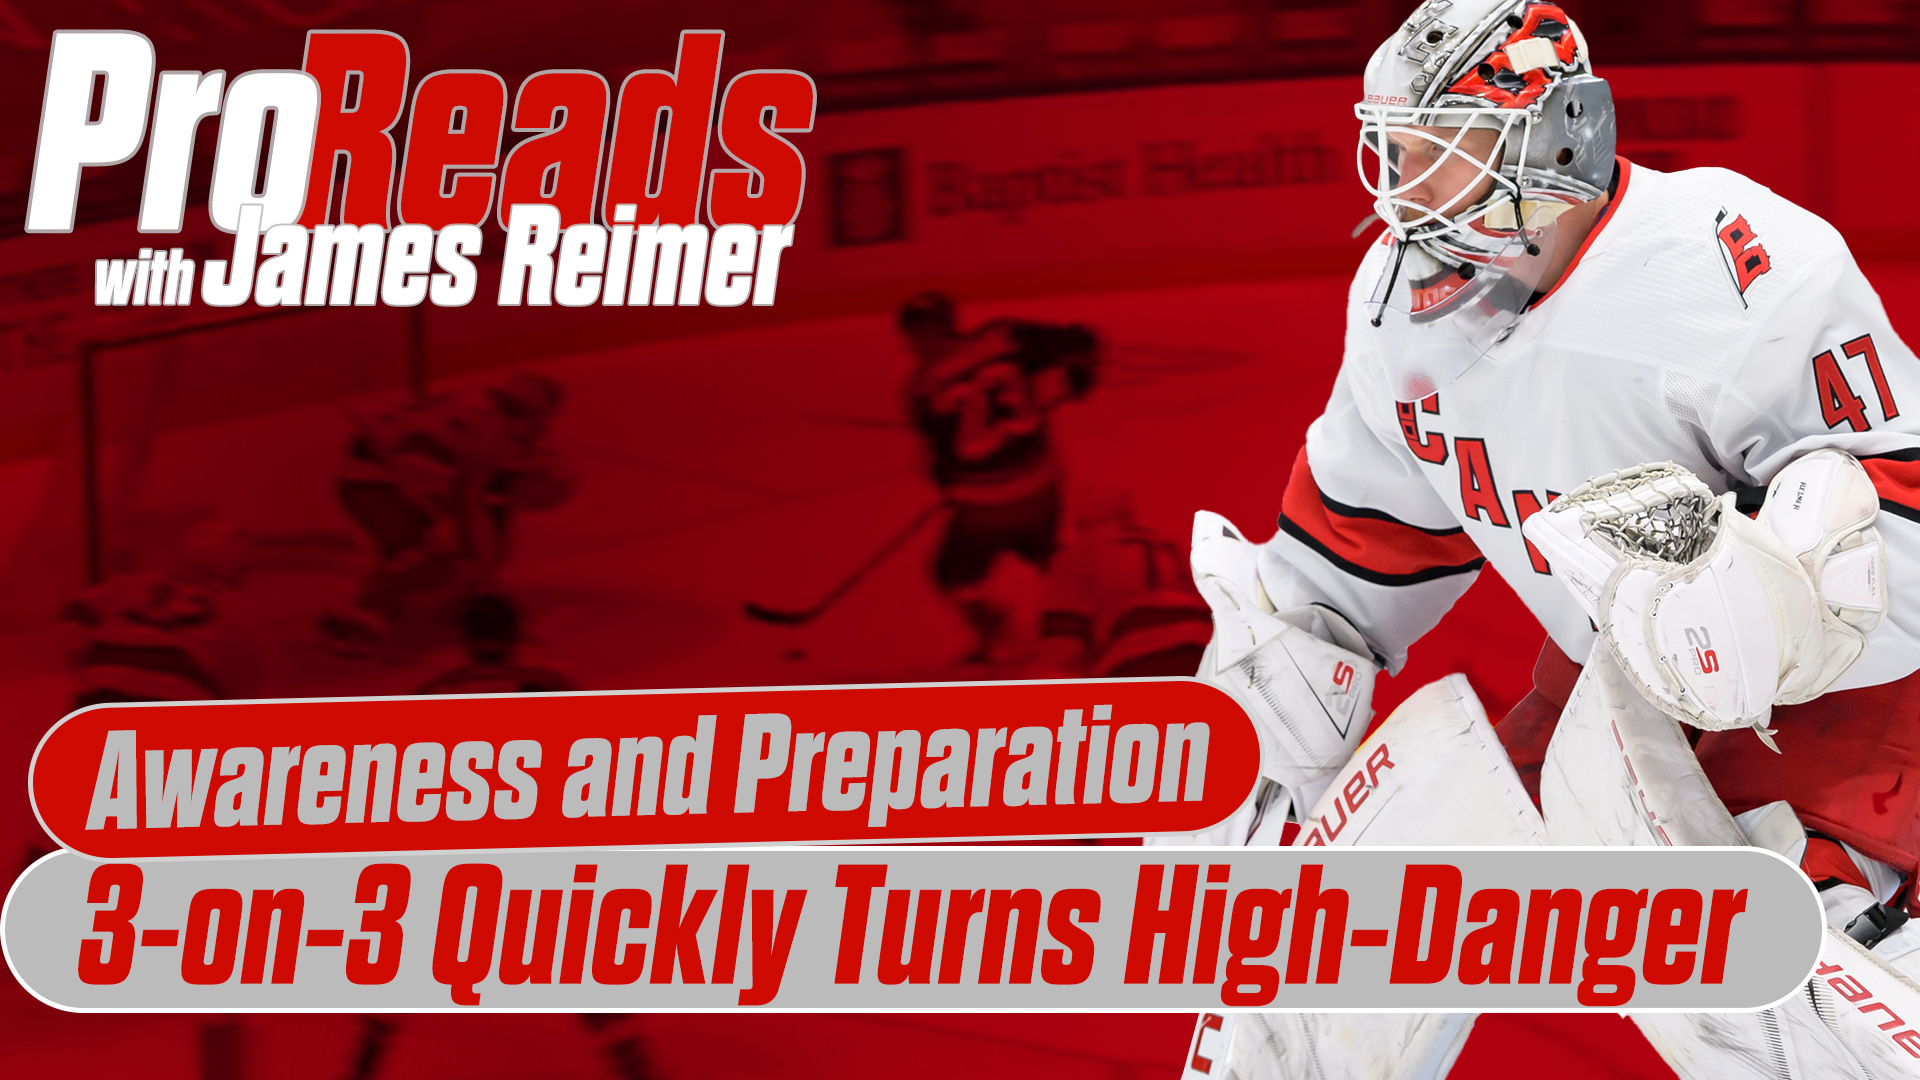 James Reimer on Being prepared as Panthers Make Something Out of Nothing